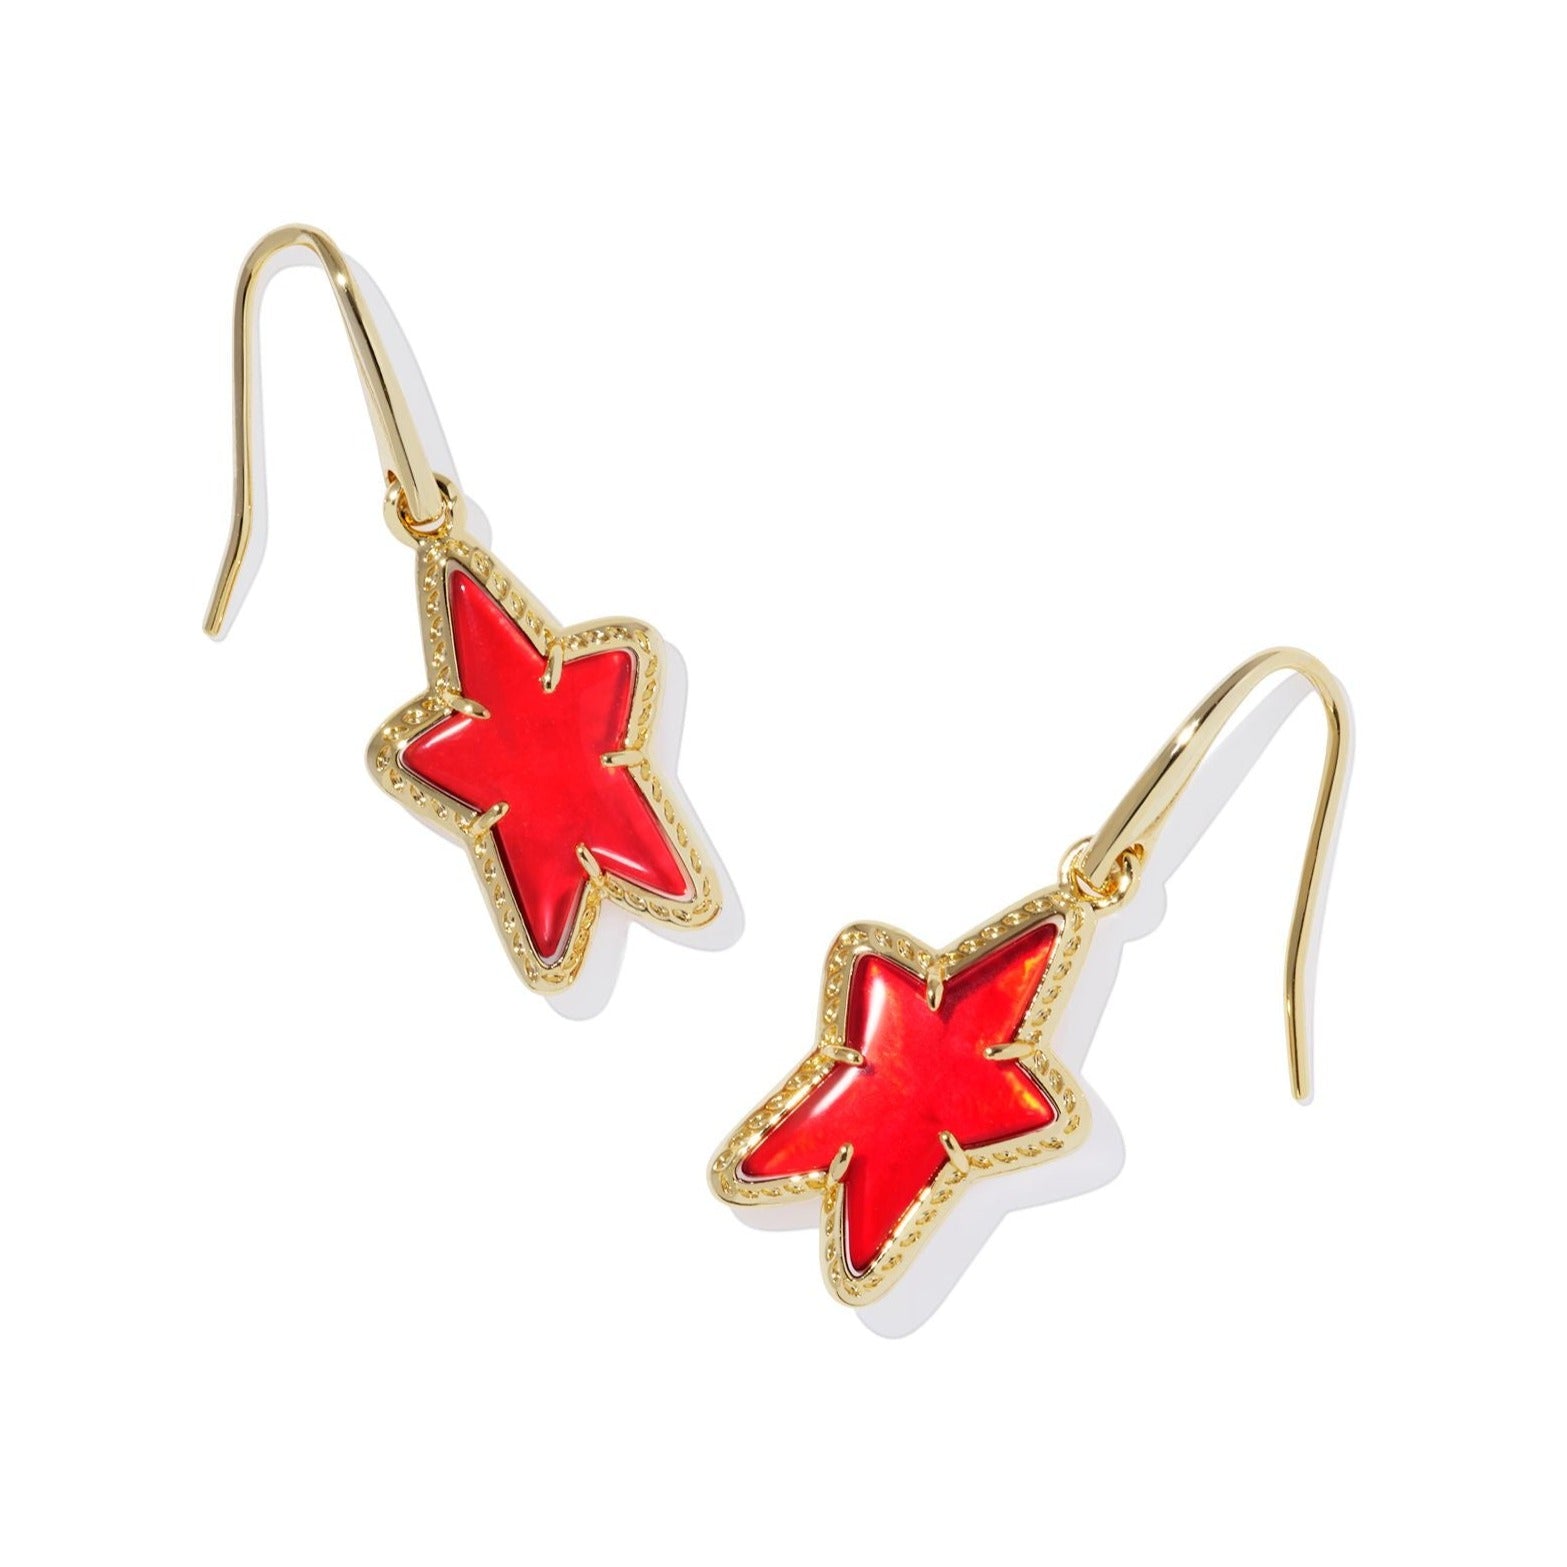 Kendra Scott | Ada Gold Small Star Drop Earrings in Red Illusion - Giddy Up Glamour Boutique